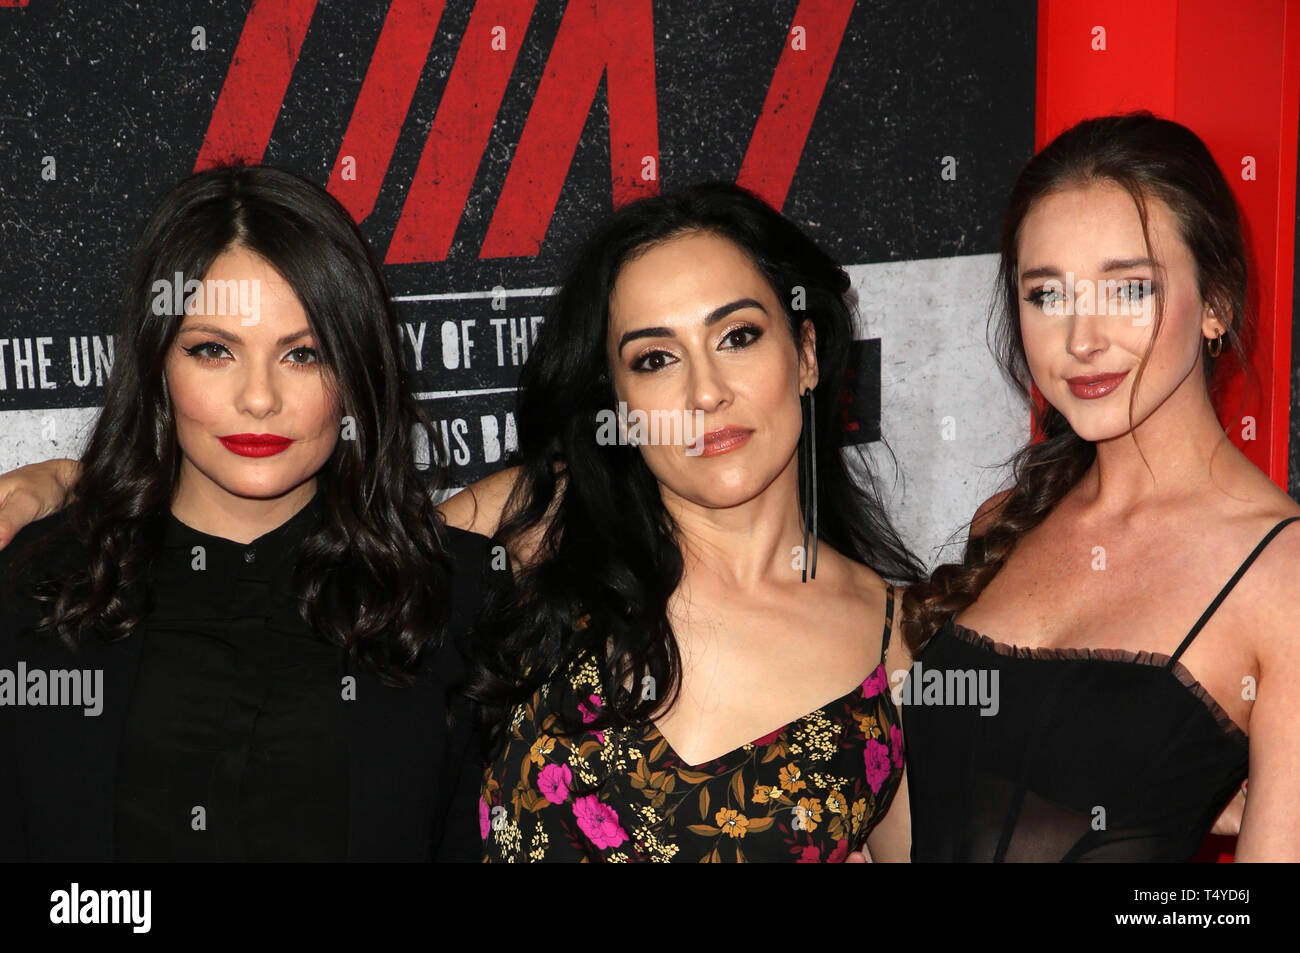 Premiere Of Netflix's 'The Dirt'  Featuring: Alexanne Wagner, Elena Evangelo, Courtney Dietz Where: Hollywood, California, United States When: 18 Mar 2019 Credit: FayesVision/WENN.com Stock Photo